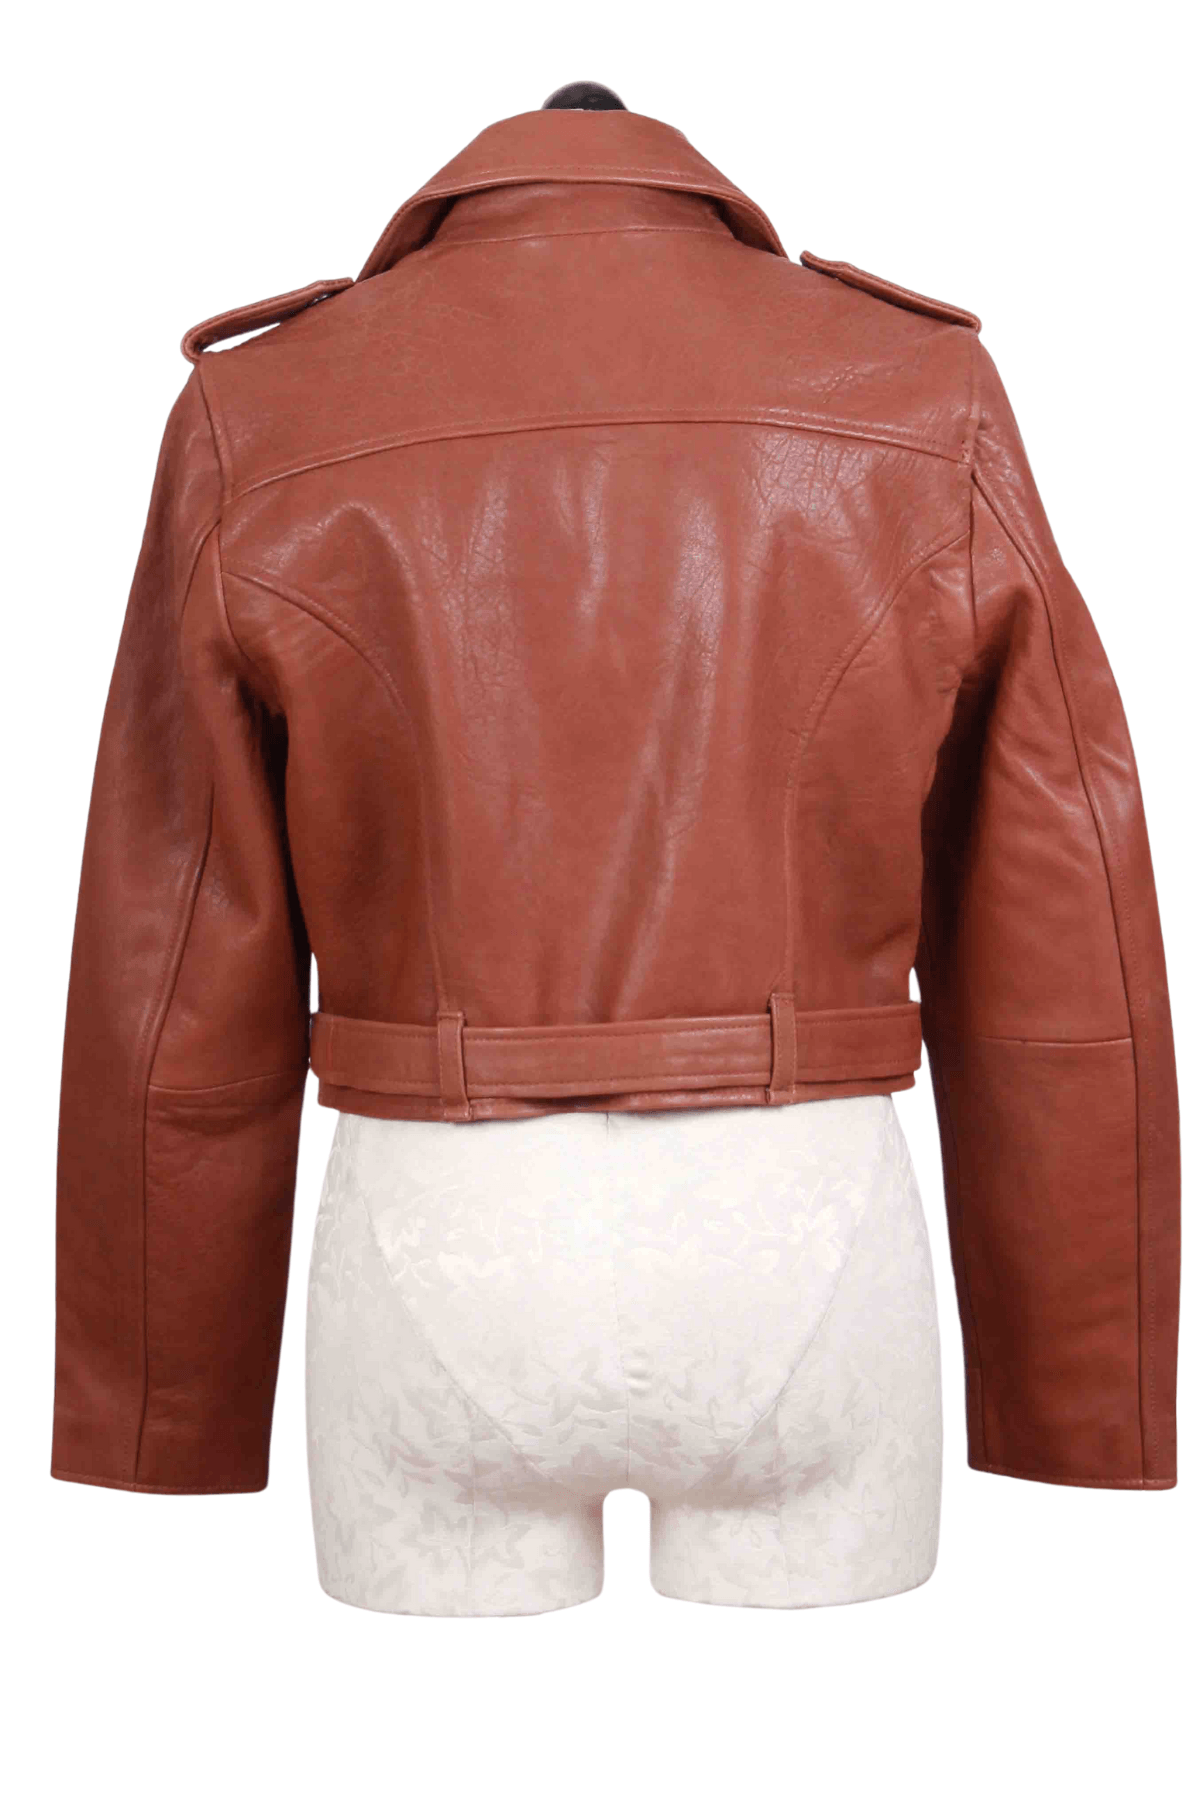 back view of Cognac Leather Jacket by Cleobella